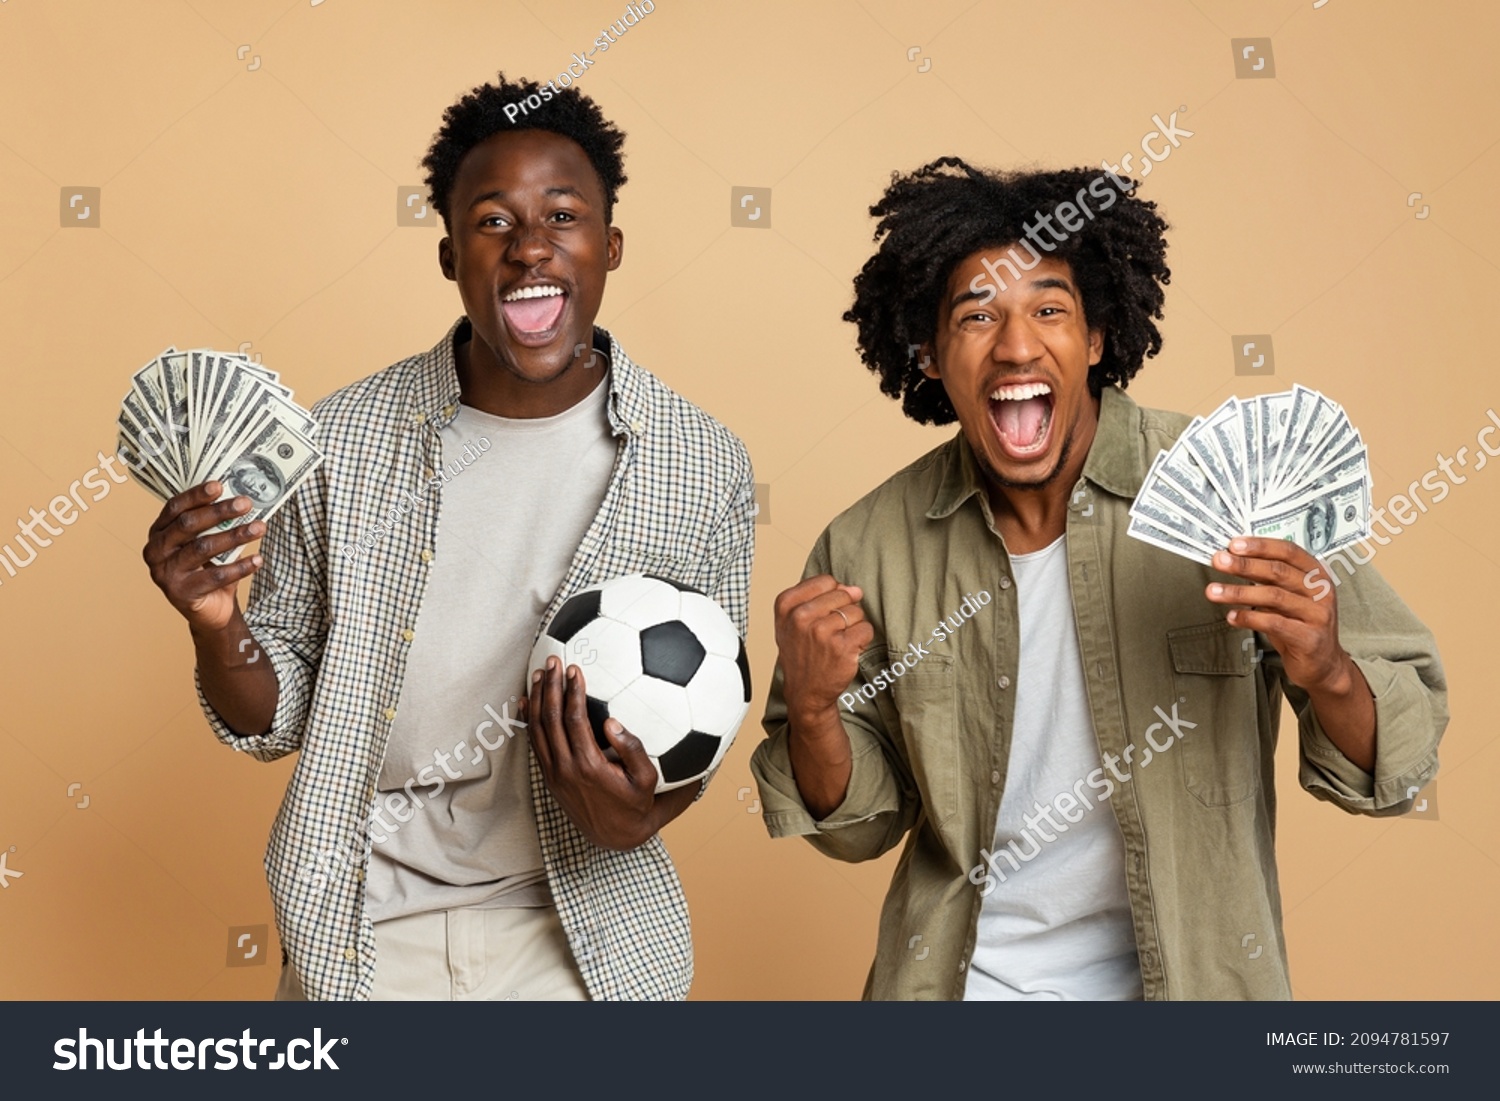 Sport Bets. Portrait Of Excited Black Guys With Football Ball And Money Standing Over Beige Background, Cheerful Soccer Fans Celebrating Success With Dollar Cash, Emotionally Reacting To Win #2094781597